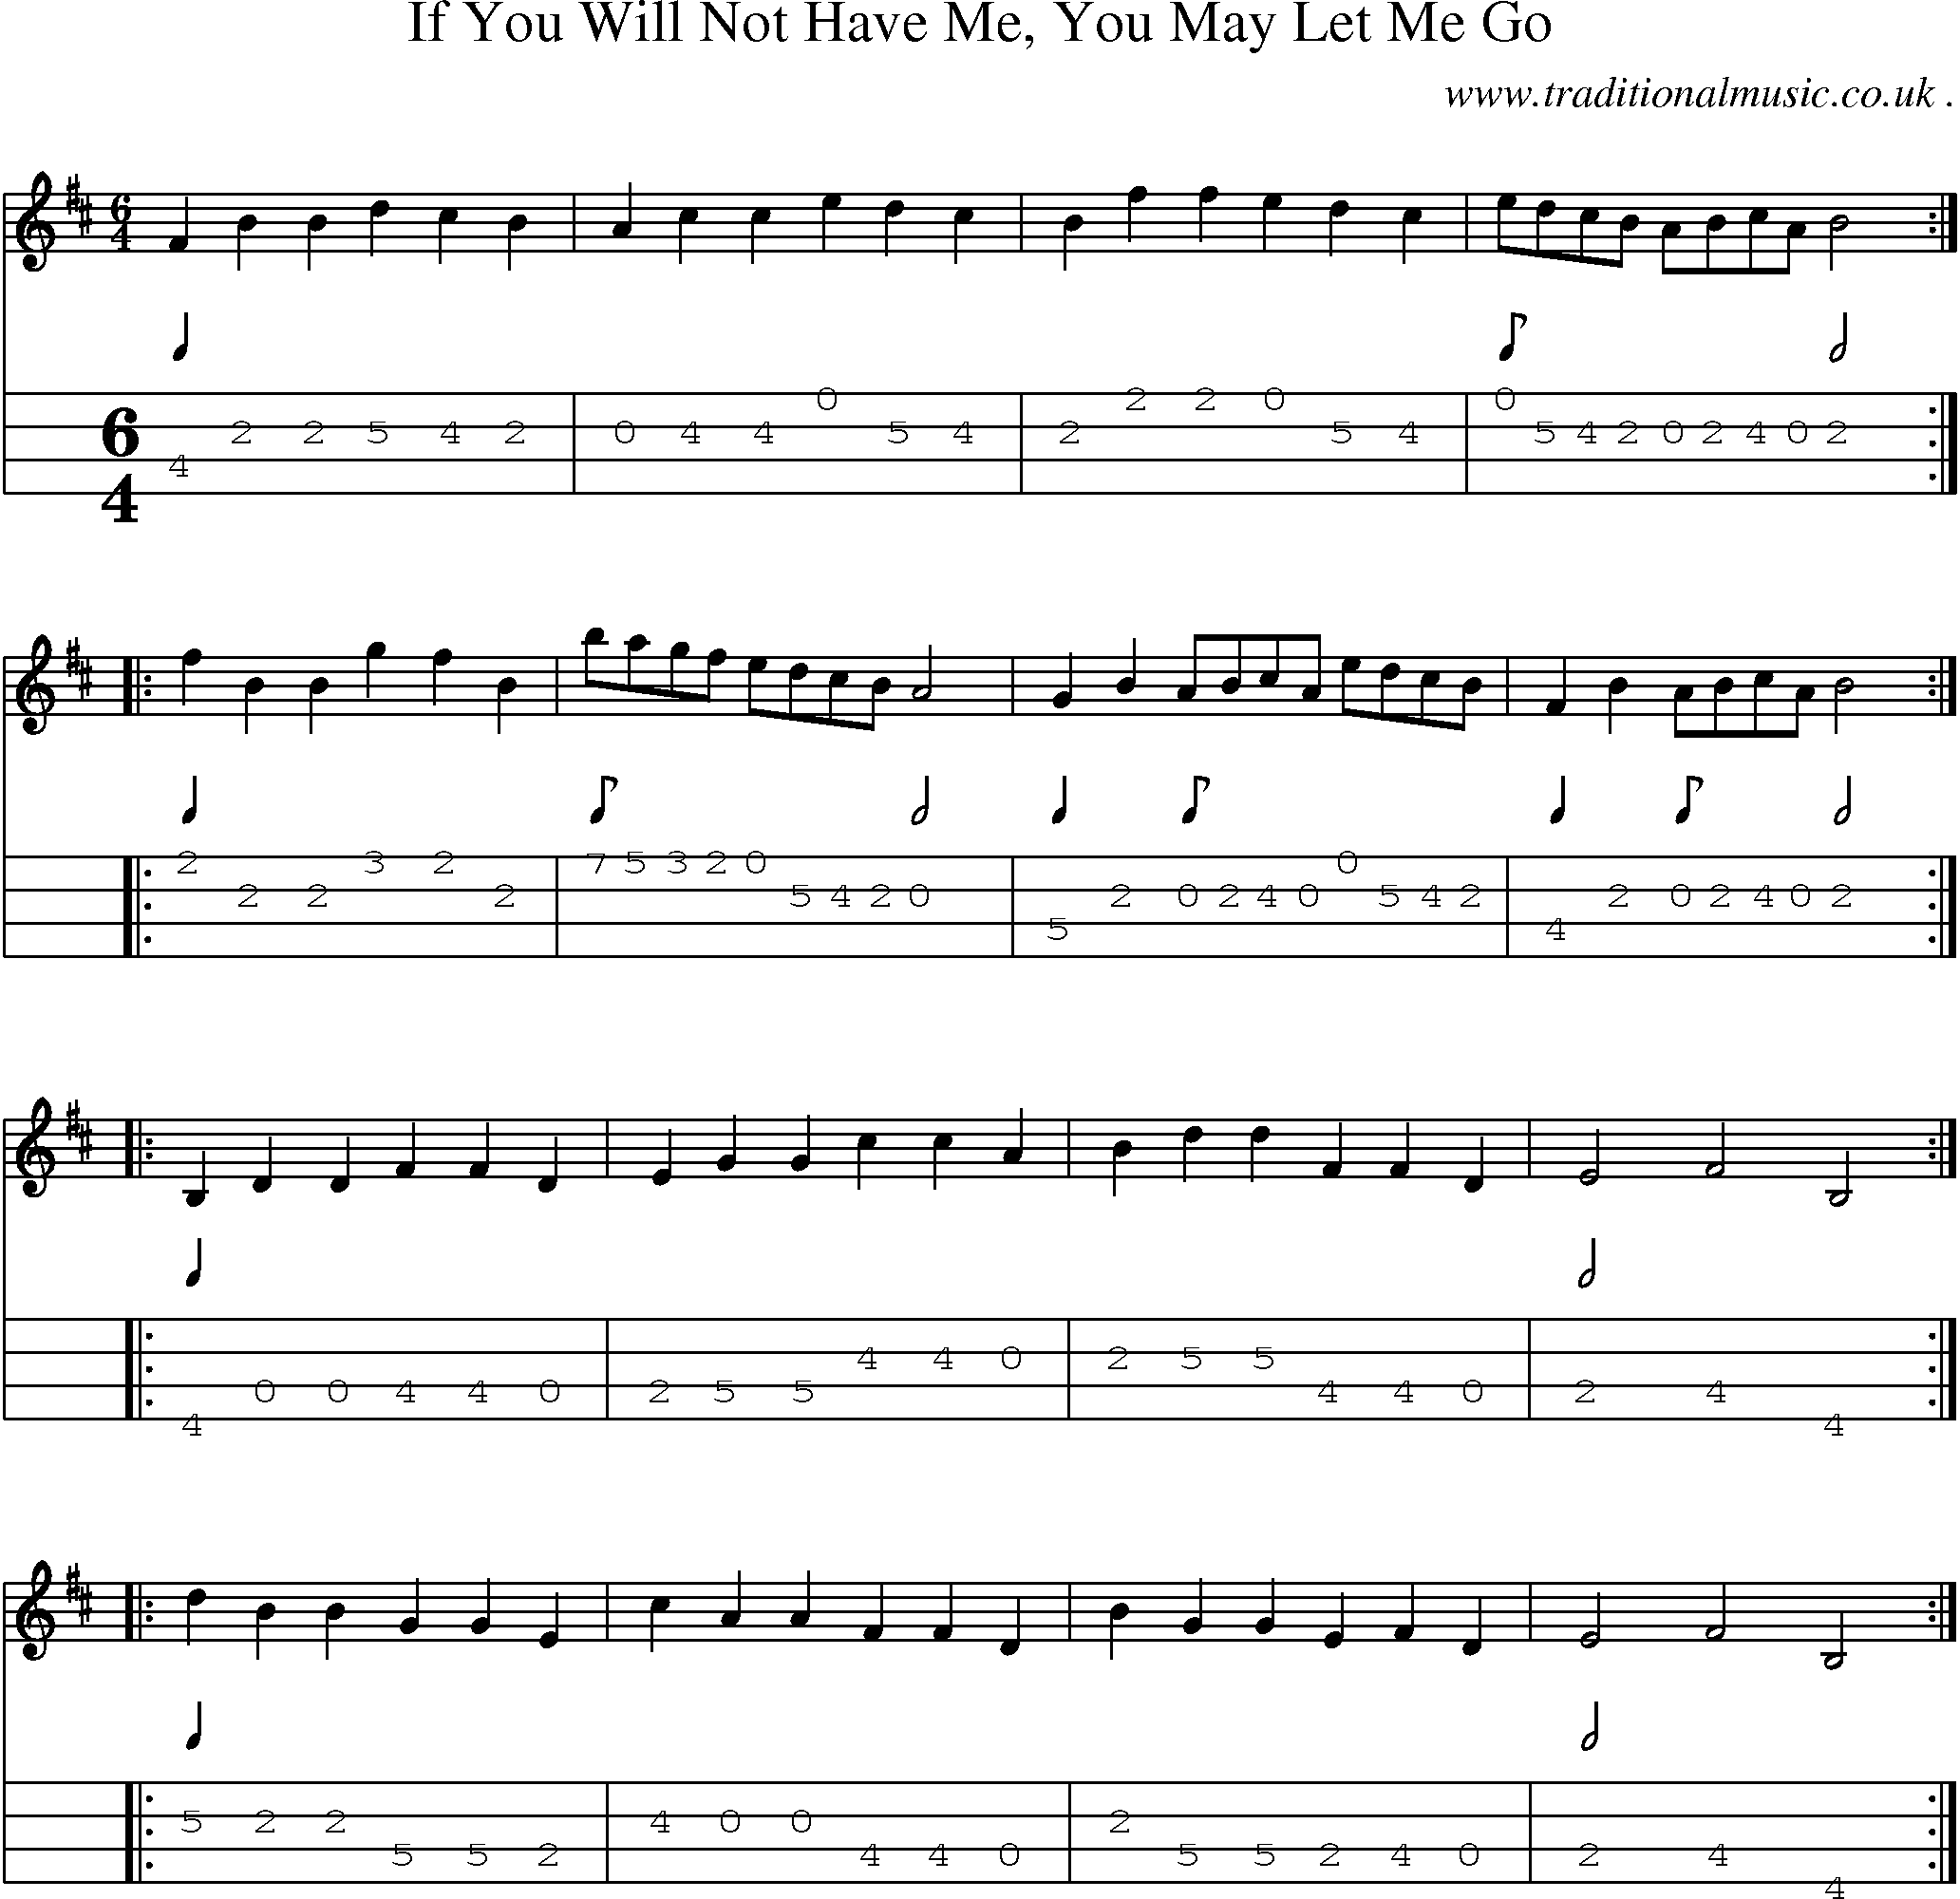 Sheet-Music and Mandolin Tabs for If You Will Not Have Me You May Let Me Go